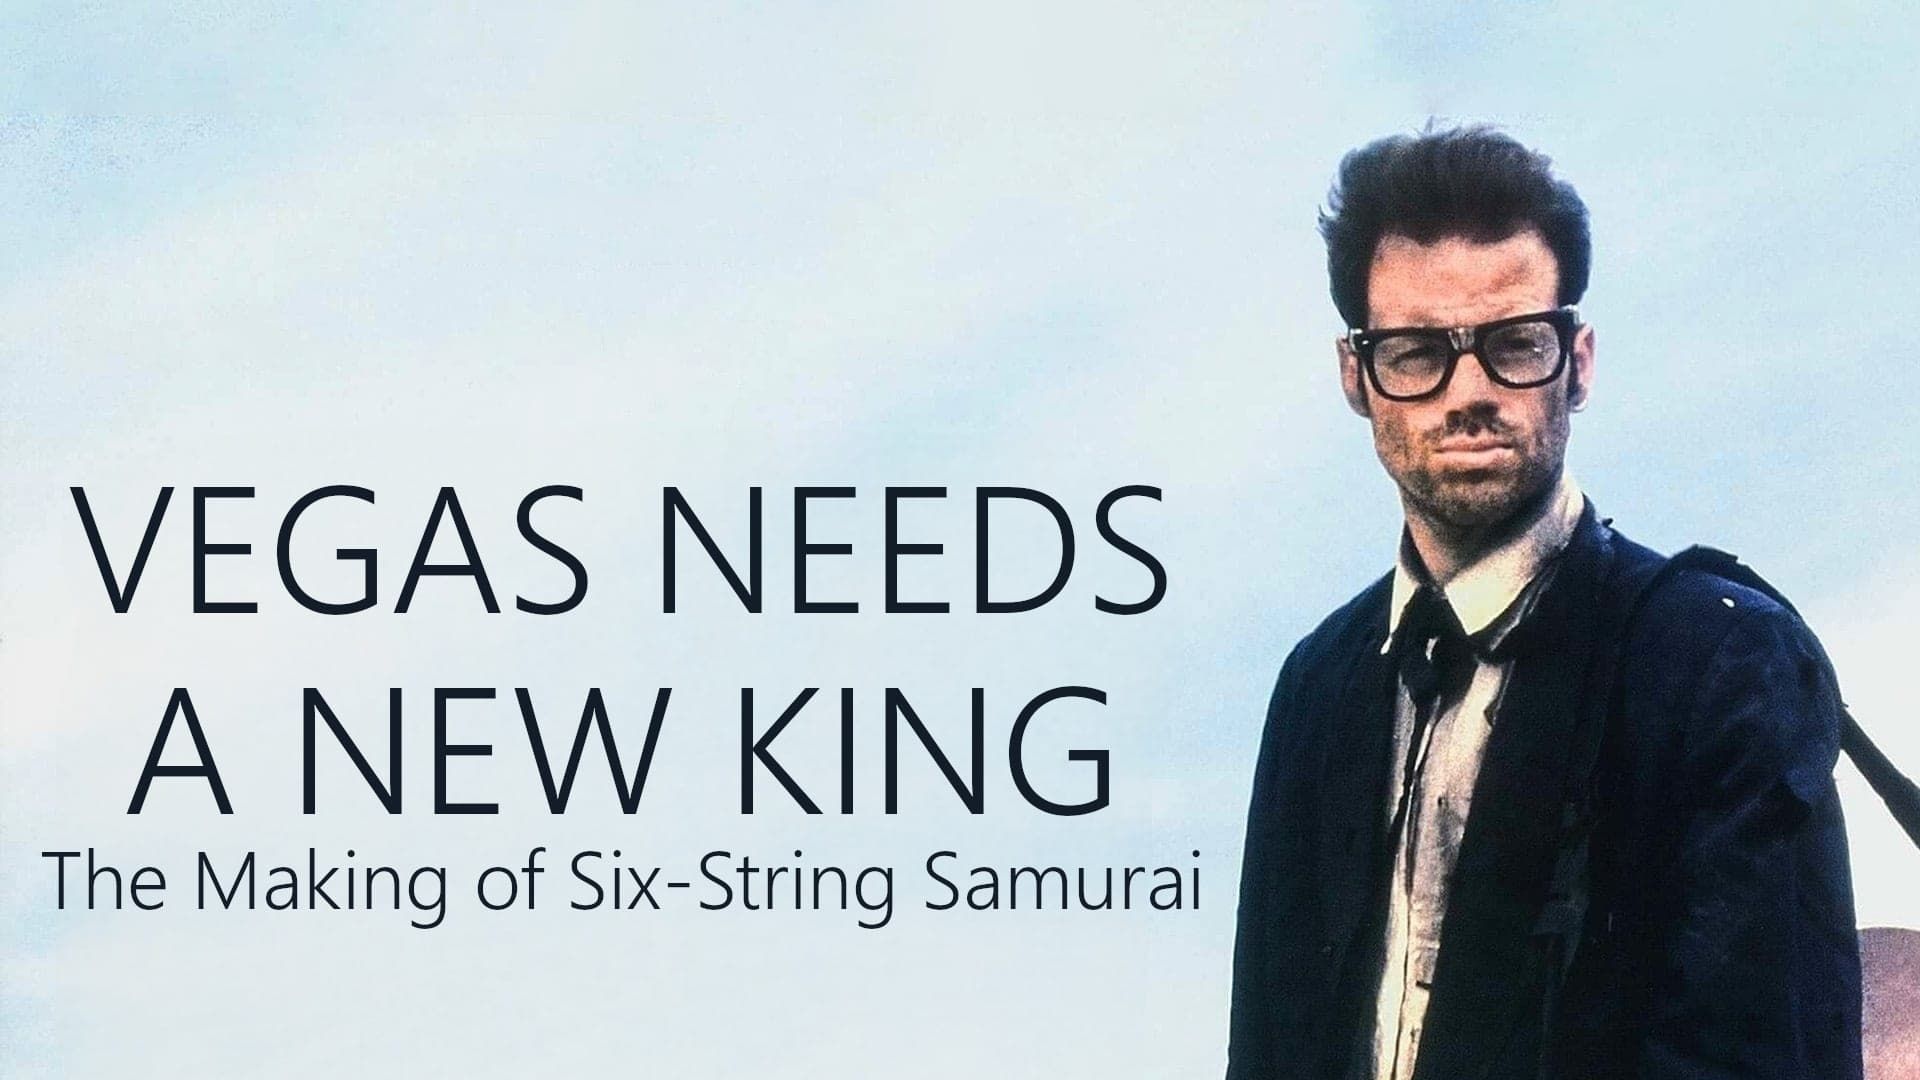 Vegas Needs a New King: The Making of 'Six-String Samurai' background